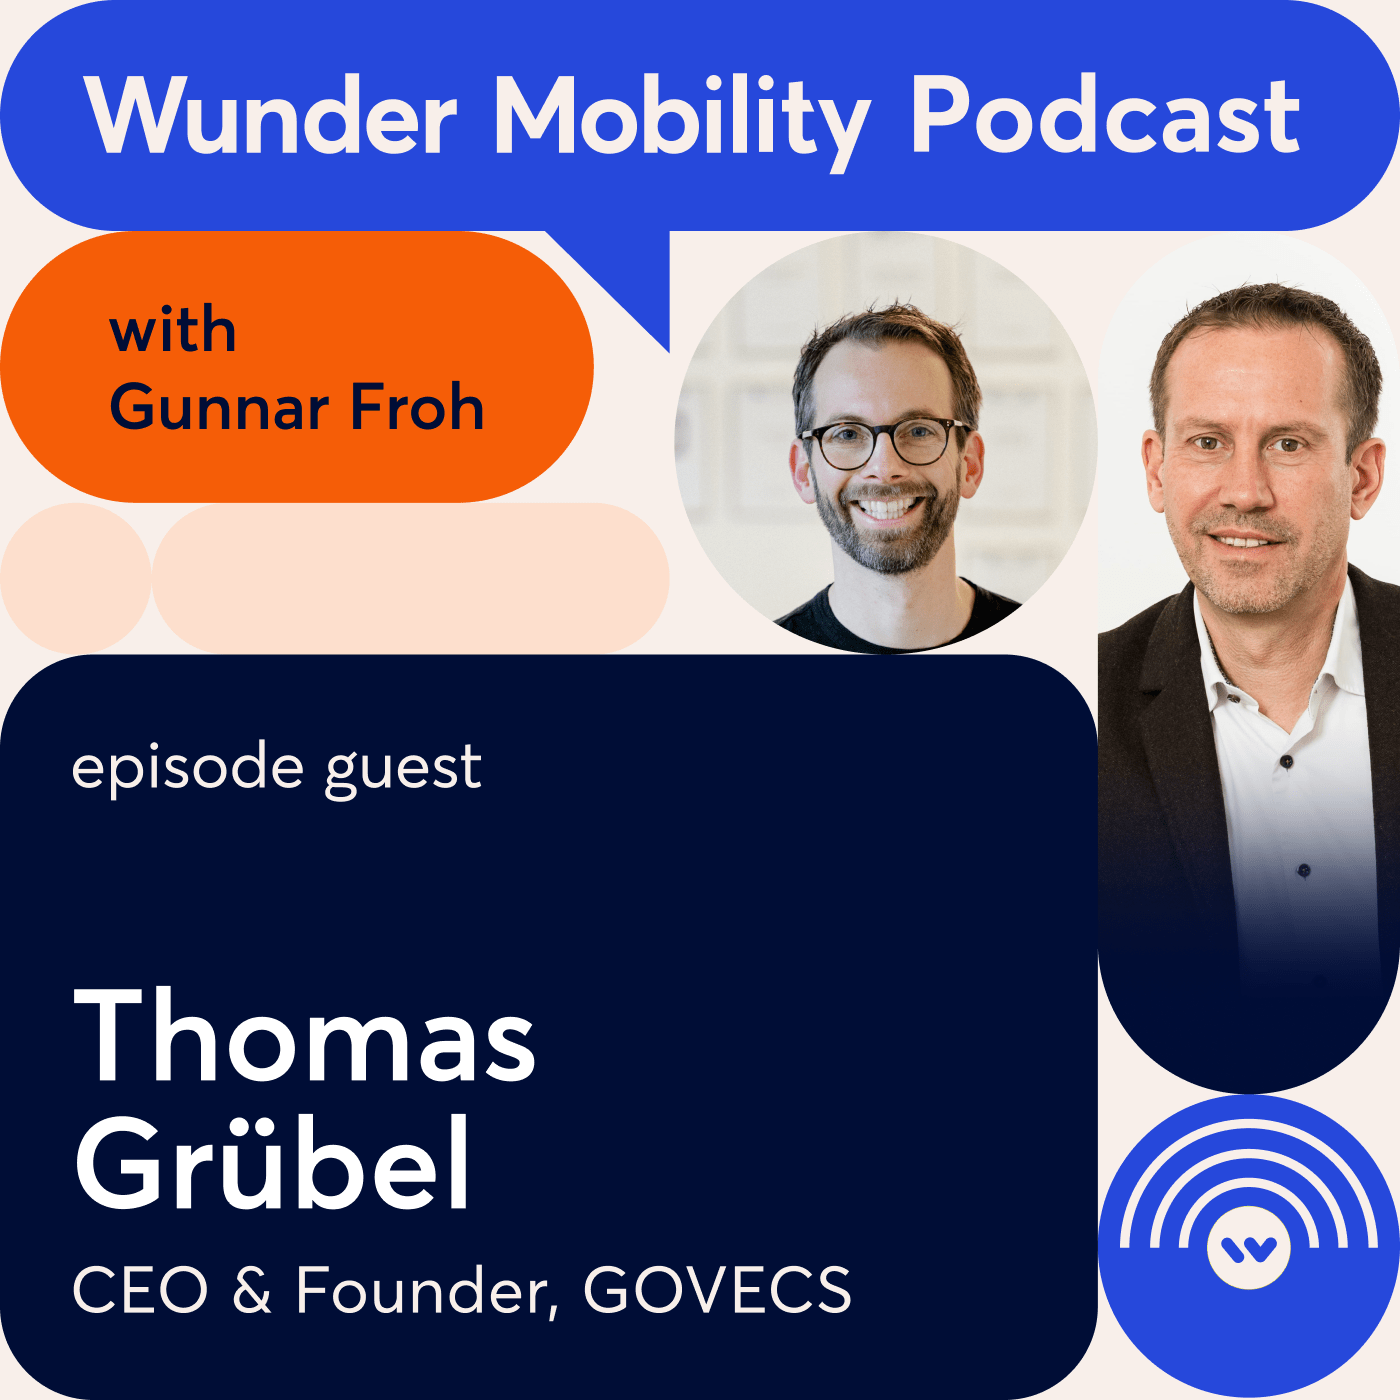 Podcast episode with  Thomas Grübel , CEO at GOVECS, displayed together with Gunnar Froh in fun colored shaped design elements.